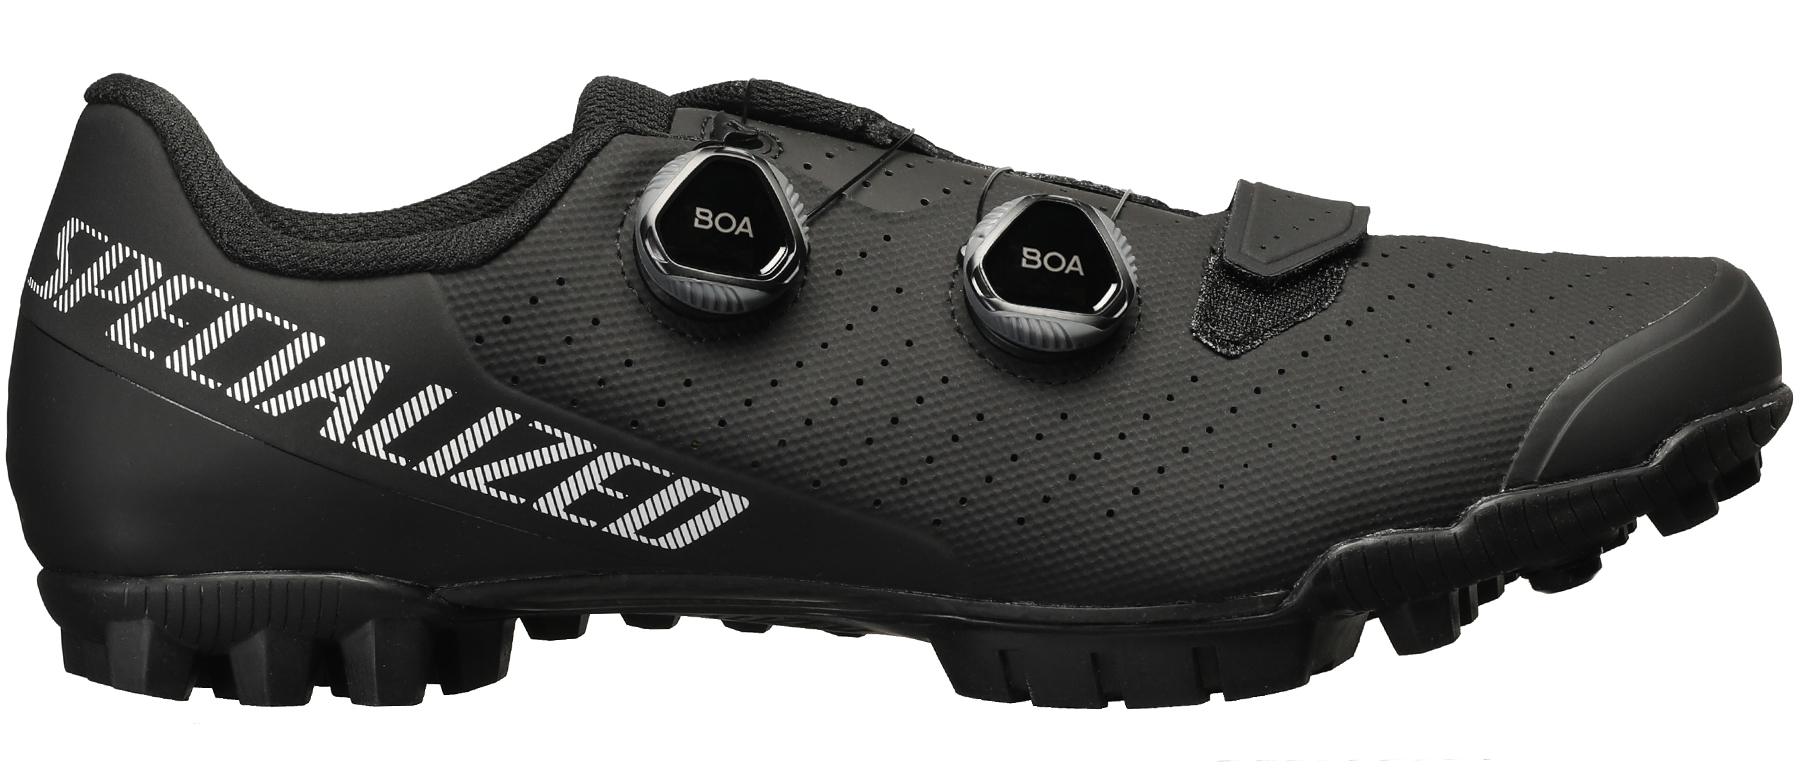 Specialized Recon 3.0 Mountain Shoe